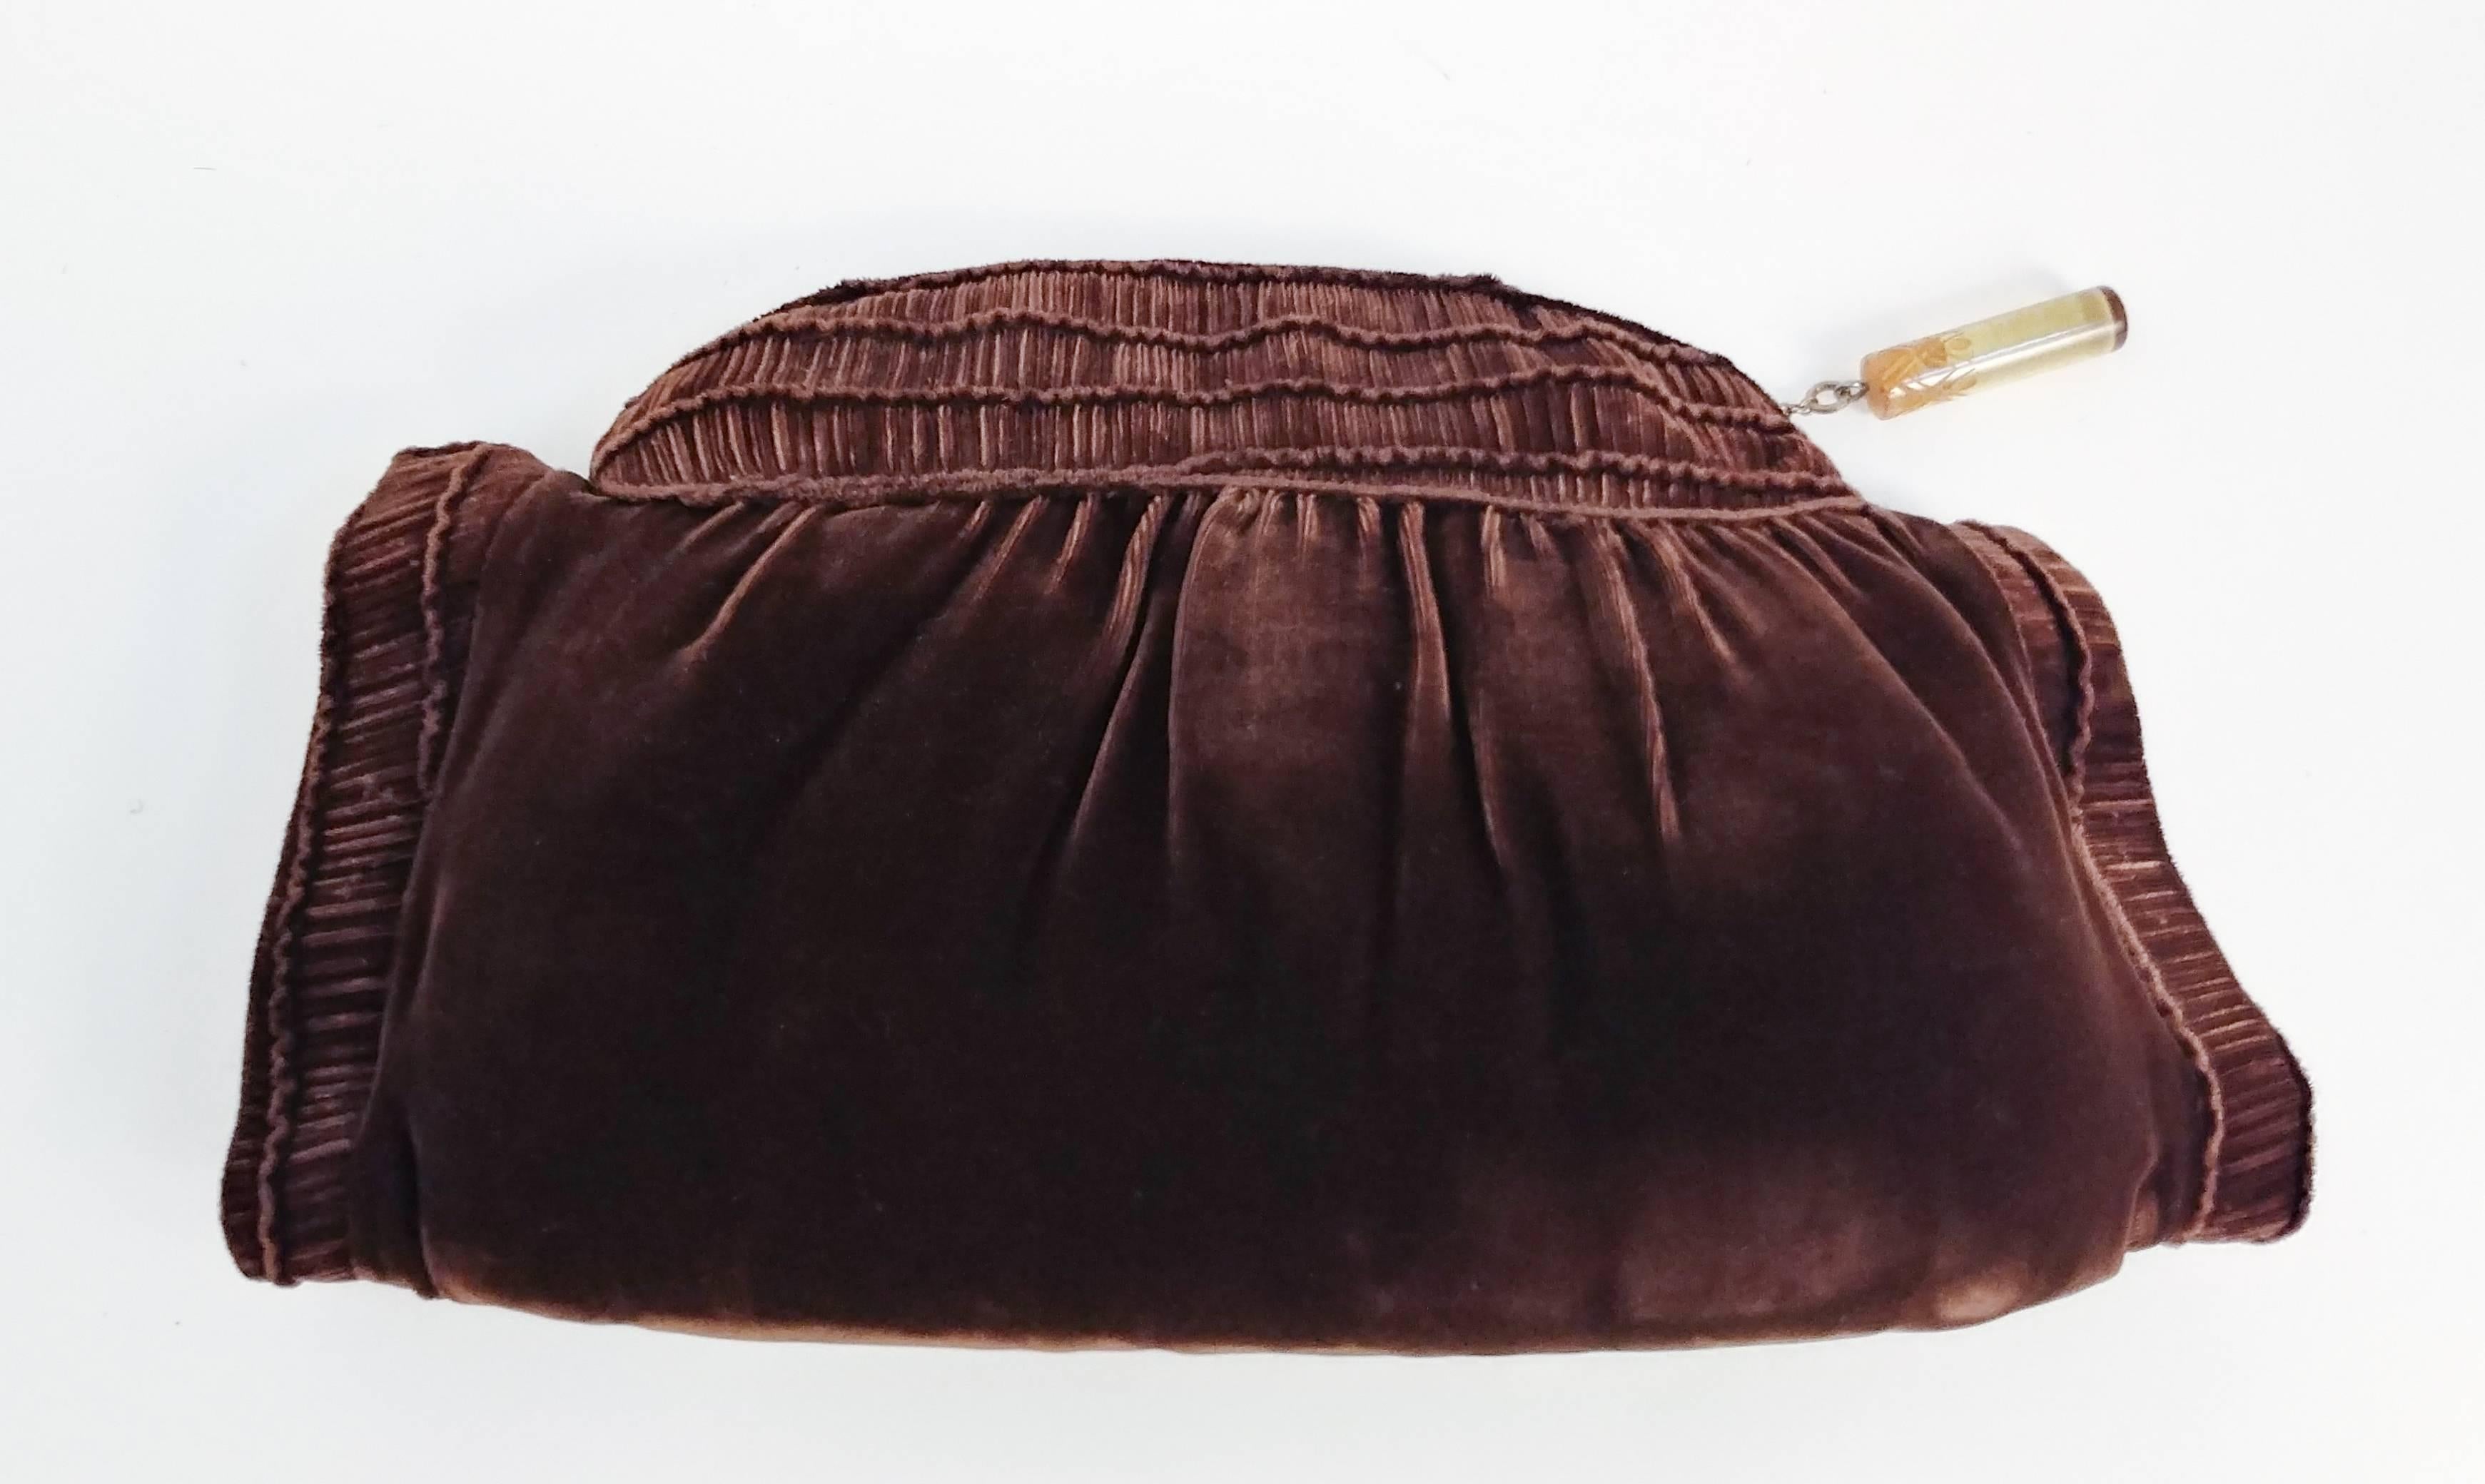 1940s Brown Velvet Muff. Ruched detail along top and arm holes. Velvet is in excellent condition with no noticeable pressing on fabric. Opens along top with metal zipper with lucite zipper head detail. Built-in change purse. Keep your hands warm and